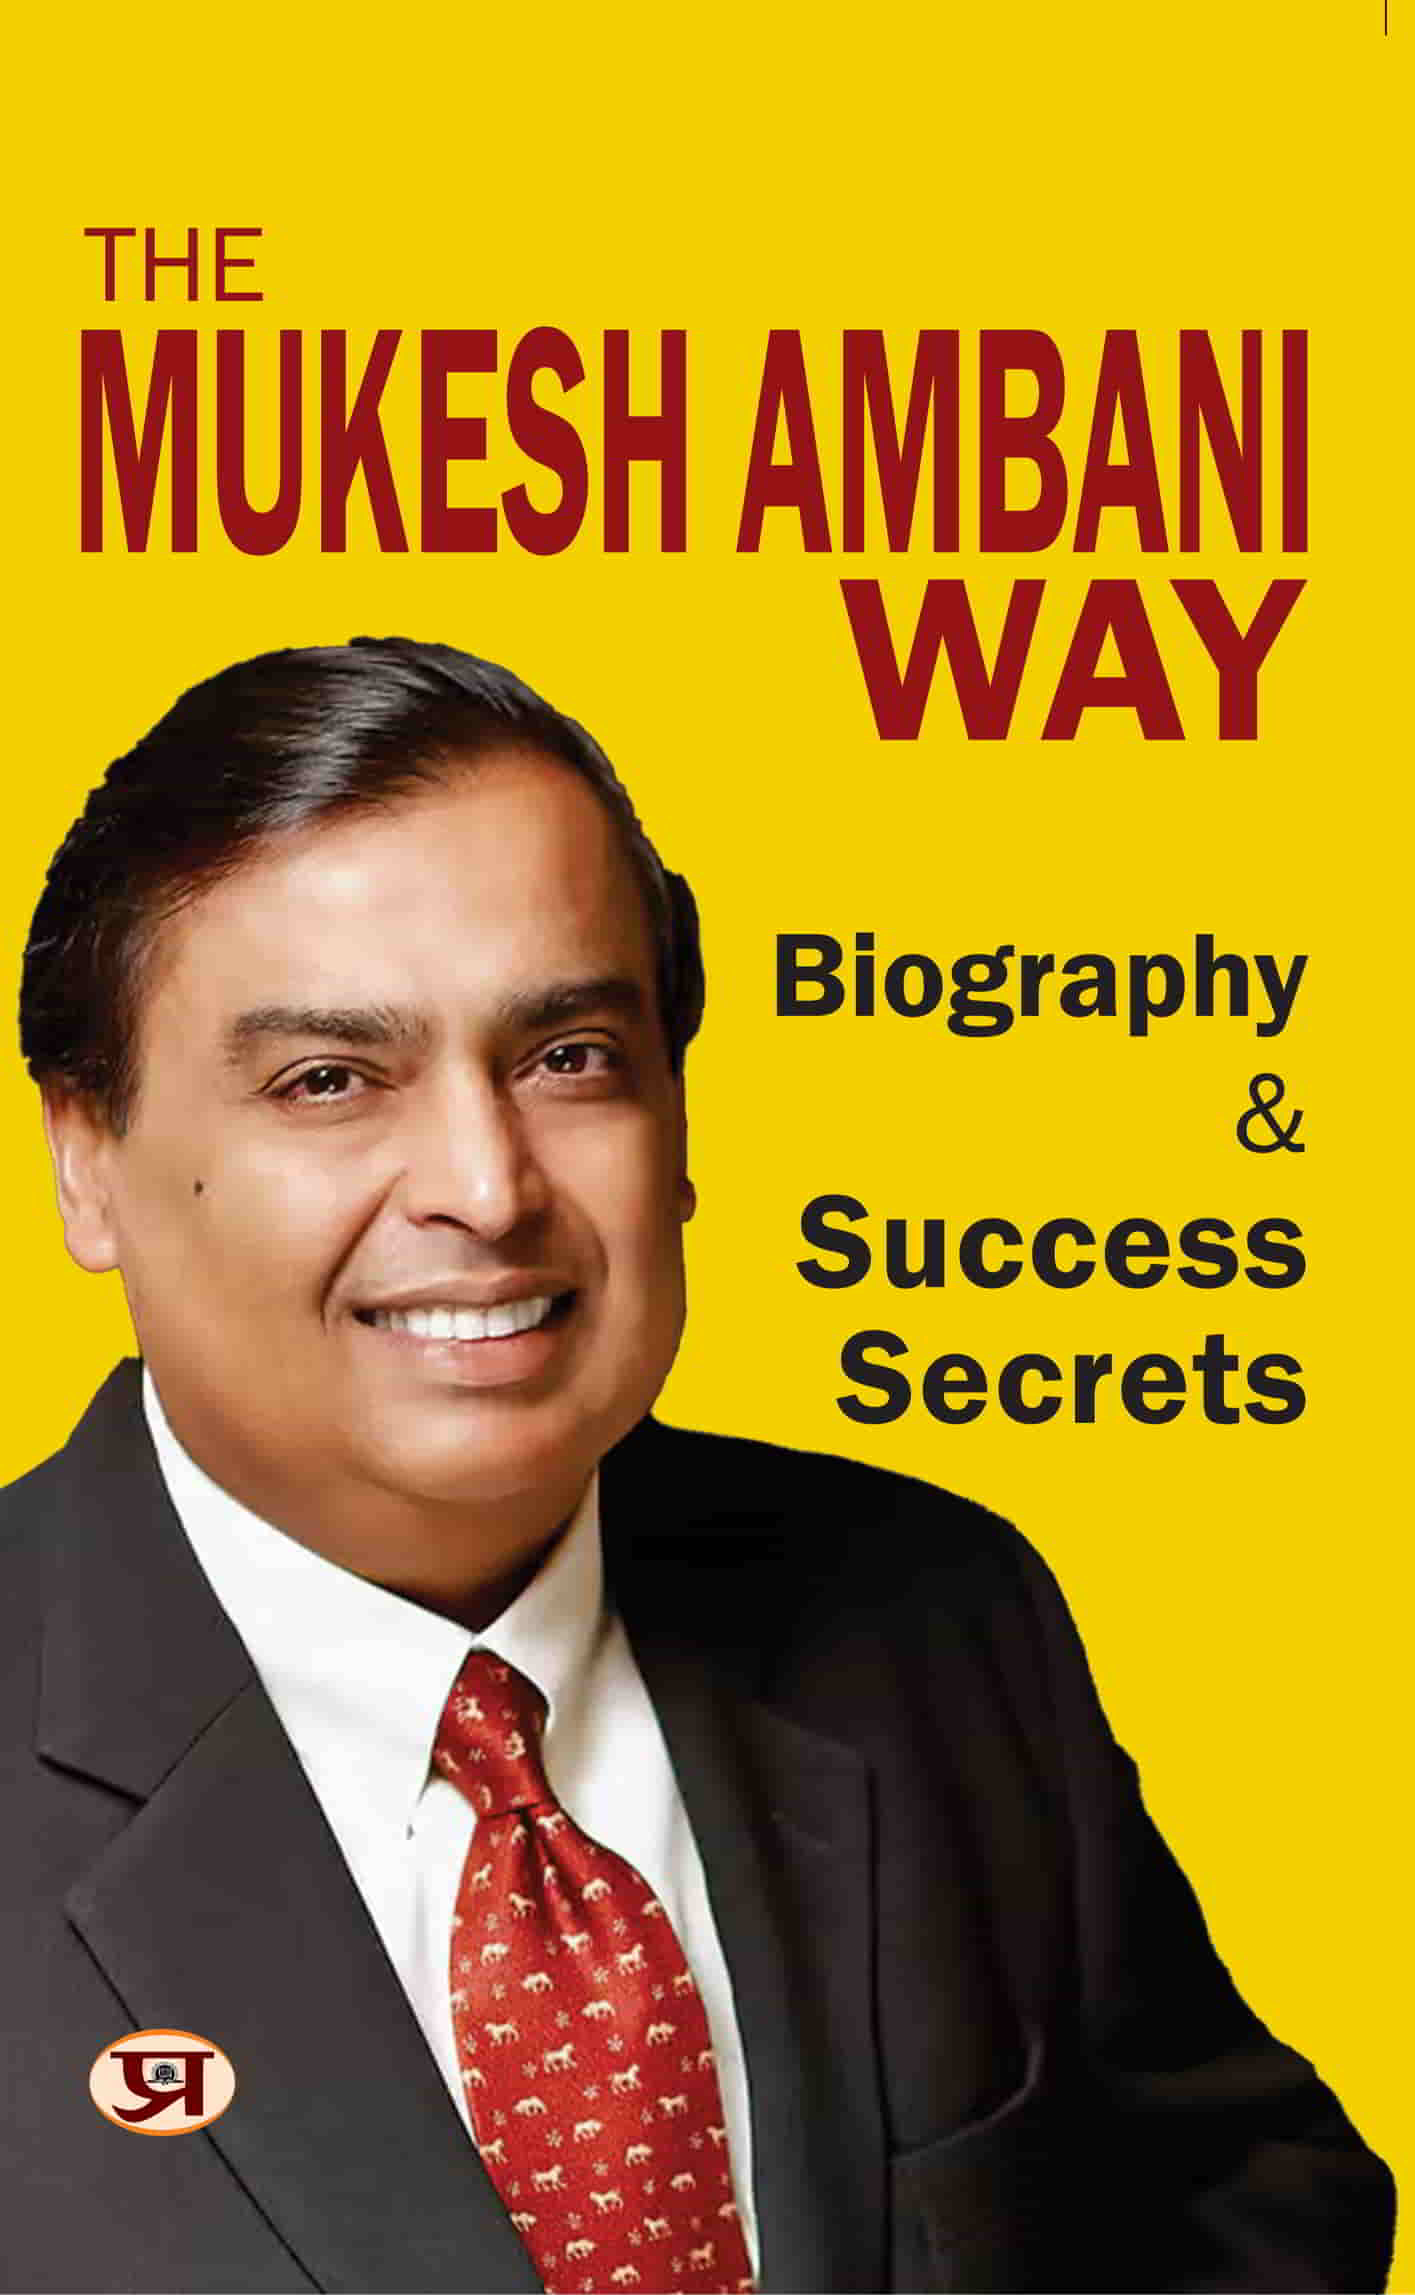 The Mukesh Ambani Way: Biography & Success Secrets (Reliance Industries) | Life Lesson From A Successful & Inspirational Businessman